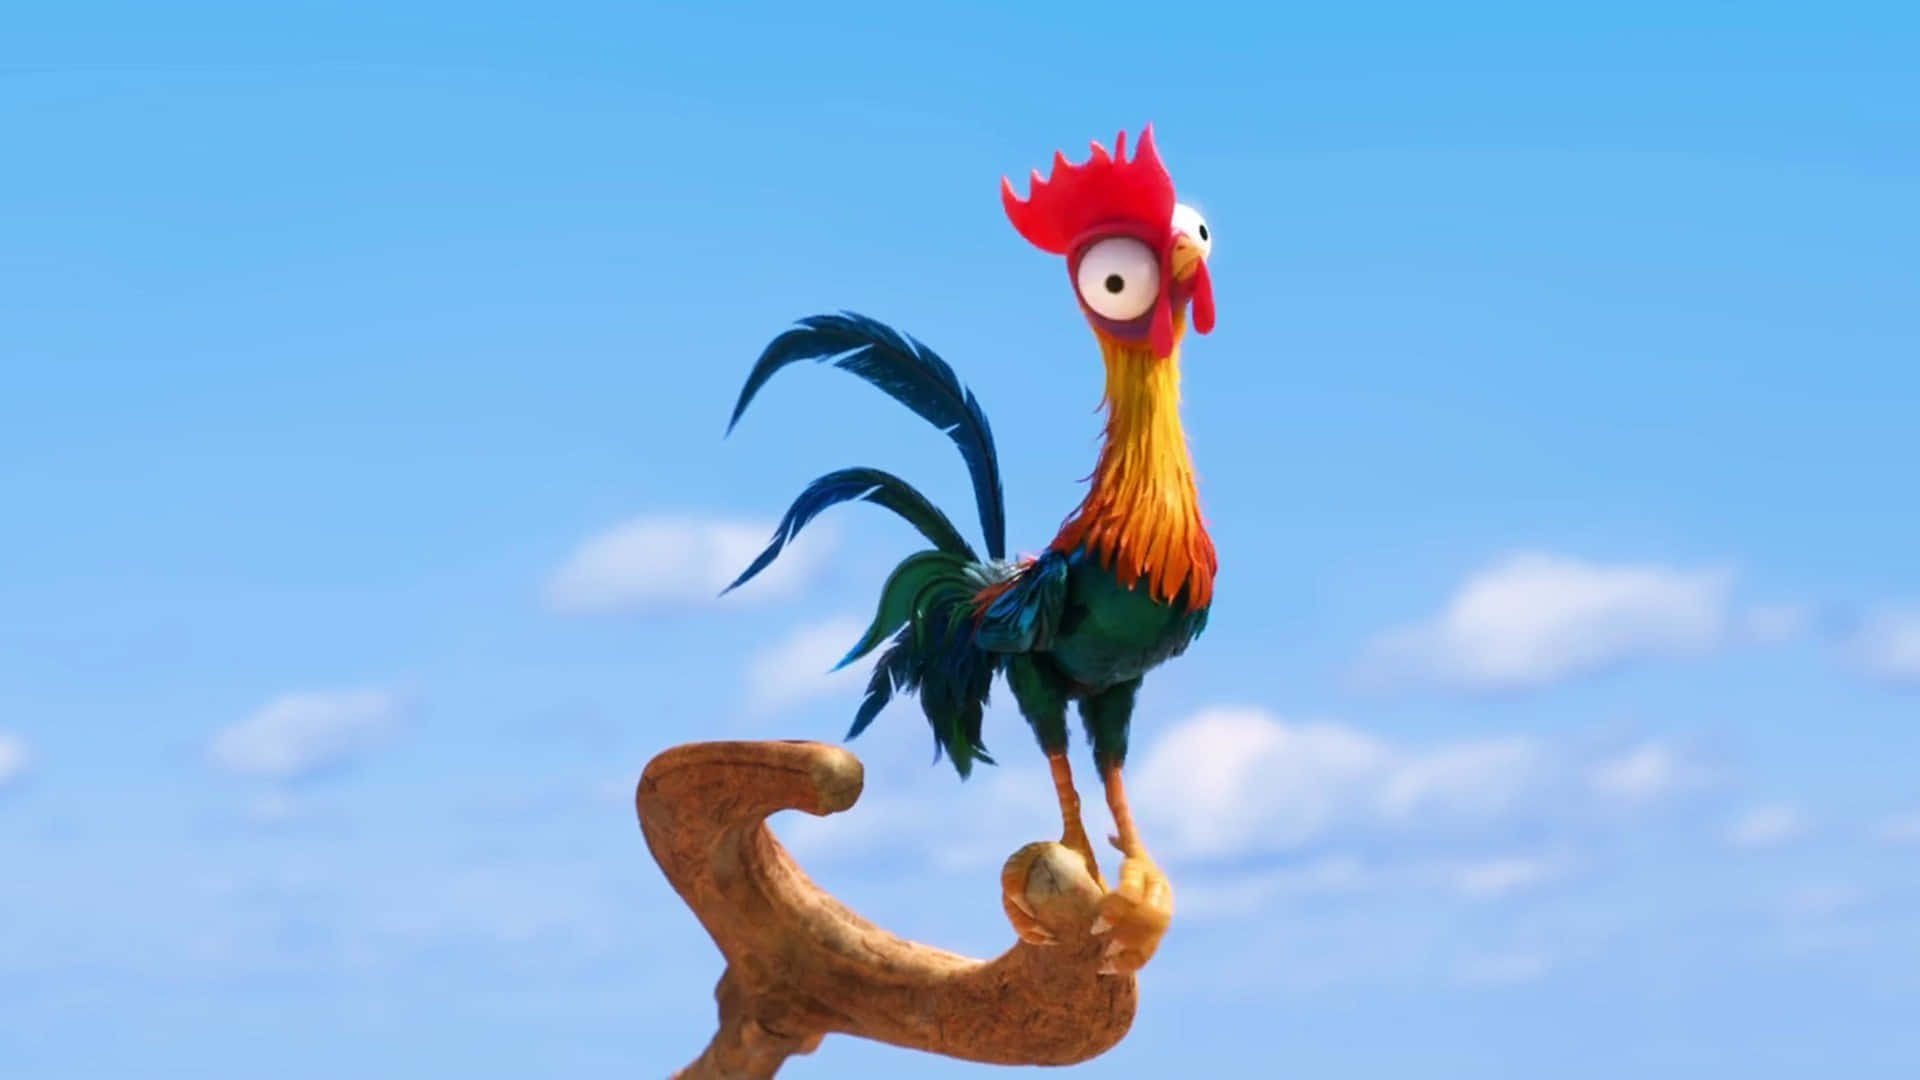 Colorful Animated Roosteron Branch Wallpaper